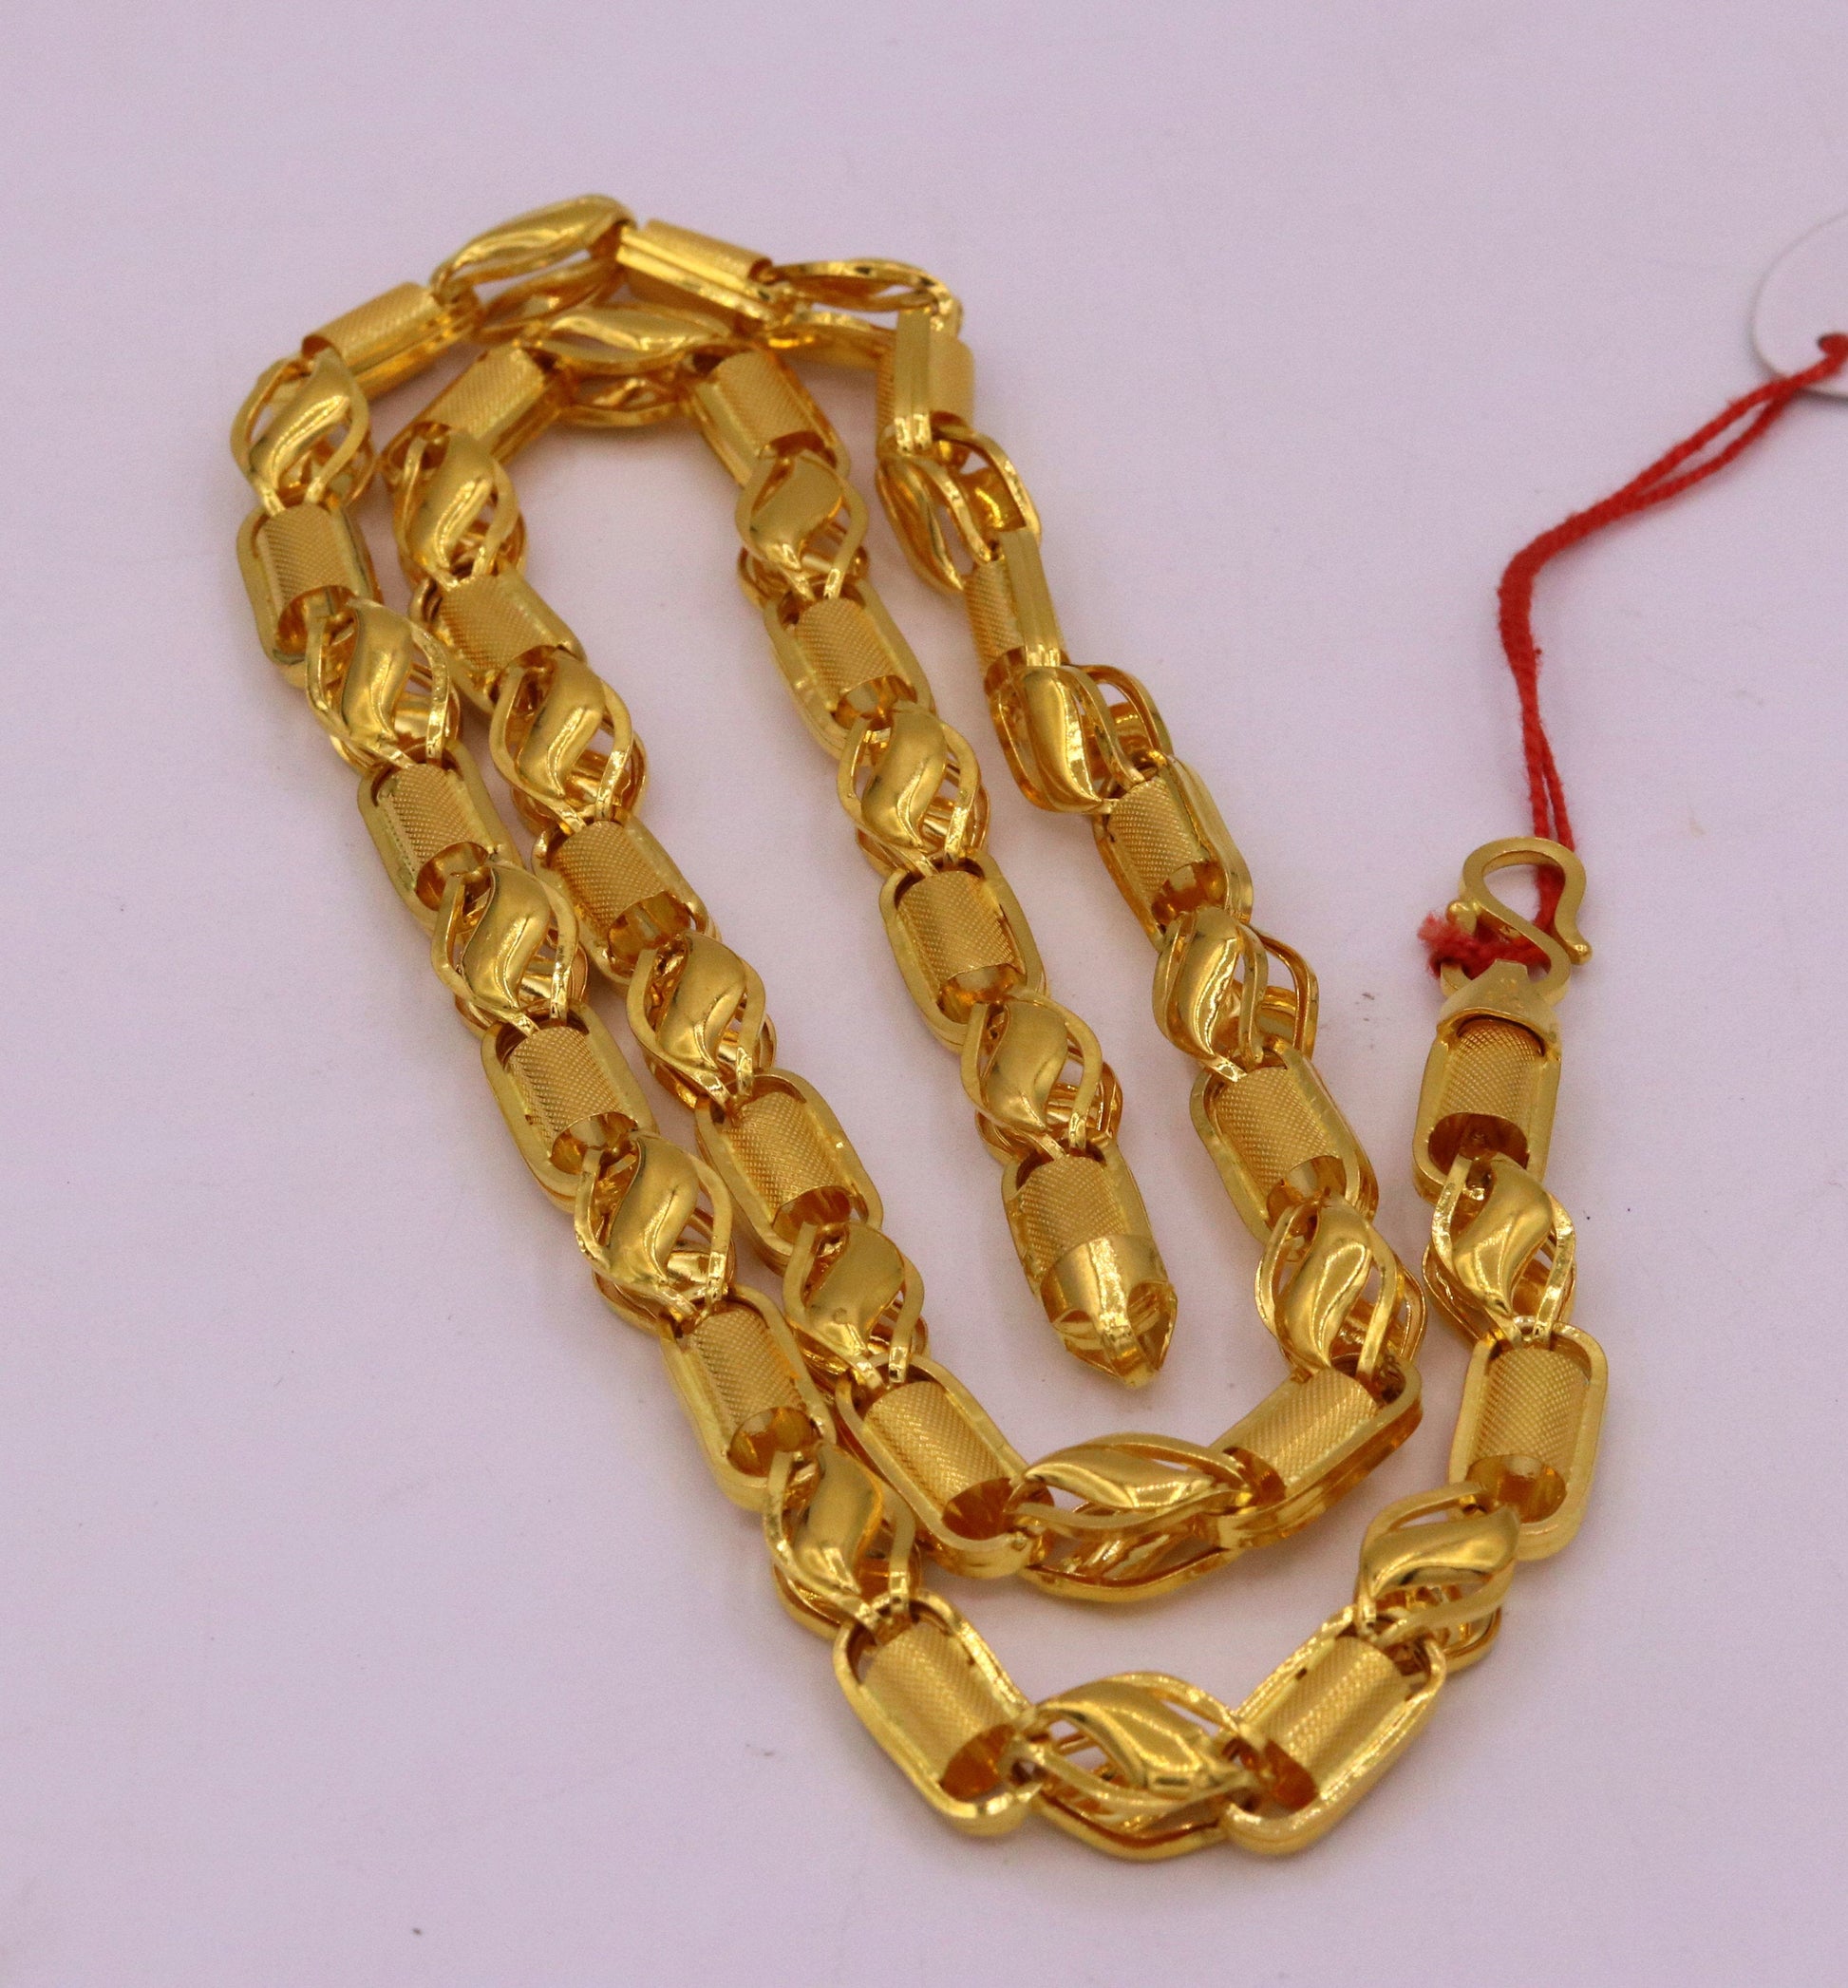 22kt yellow gold handmade amazing customized design excellent personalized gifting chain necklace from India ch211 - TRIBAL ORNAMENTS